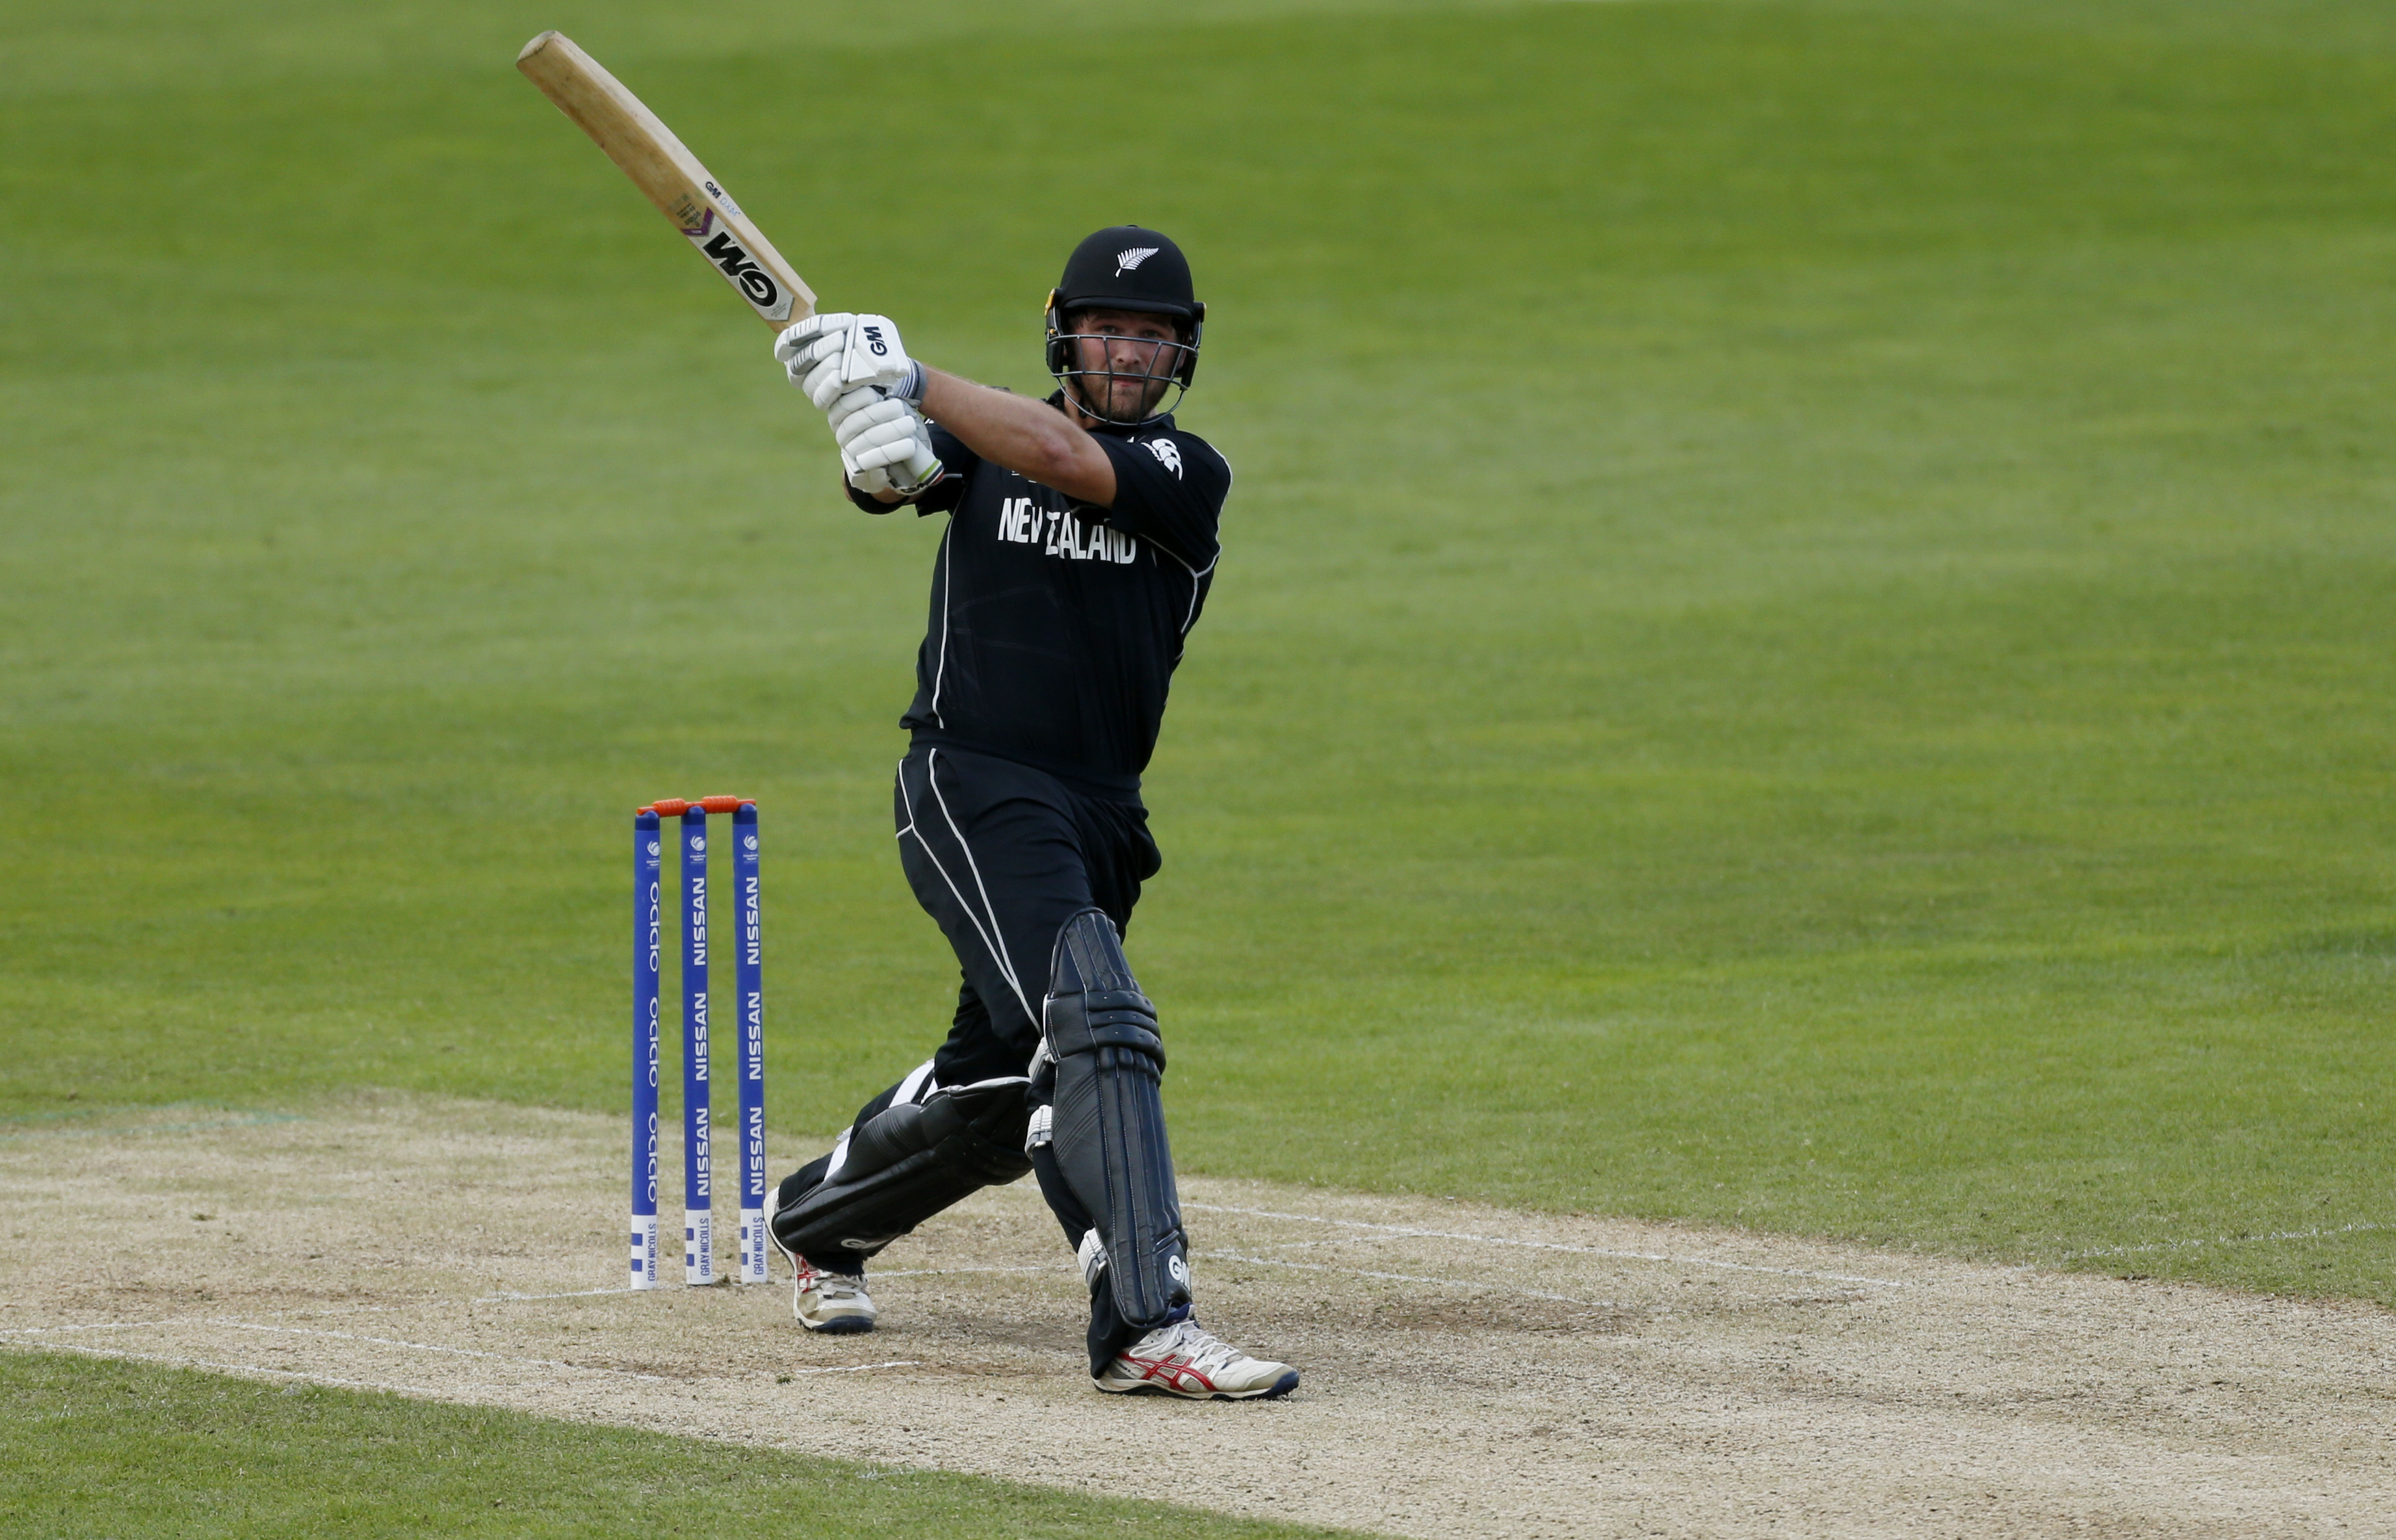 New Zealand's Corey Anderson hits a six to win the match